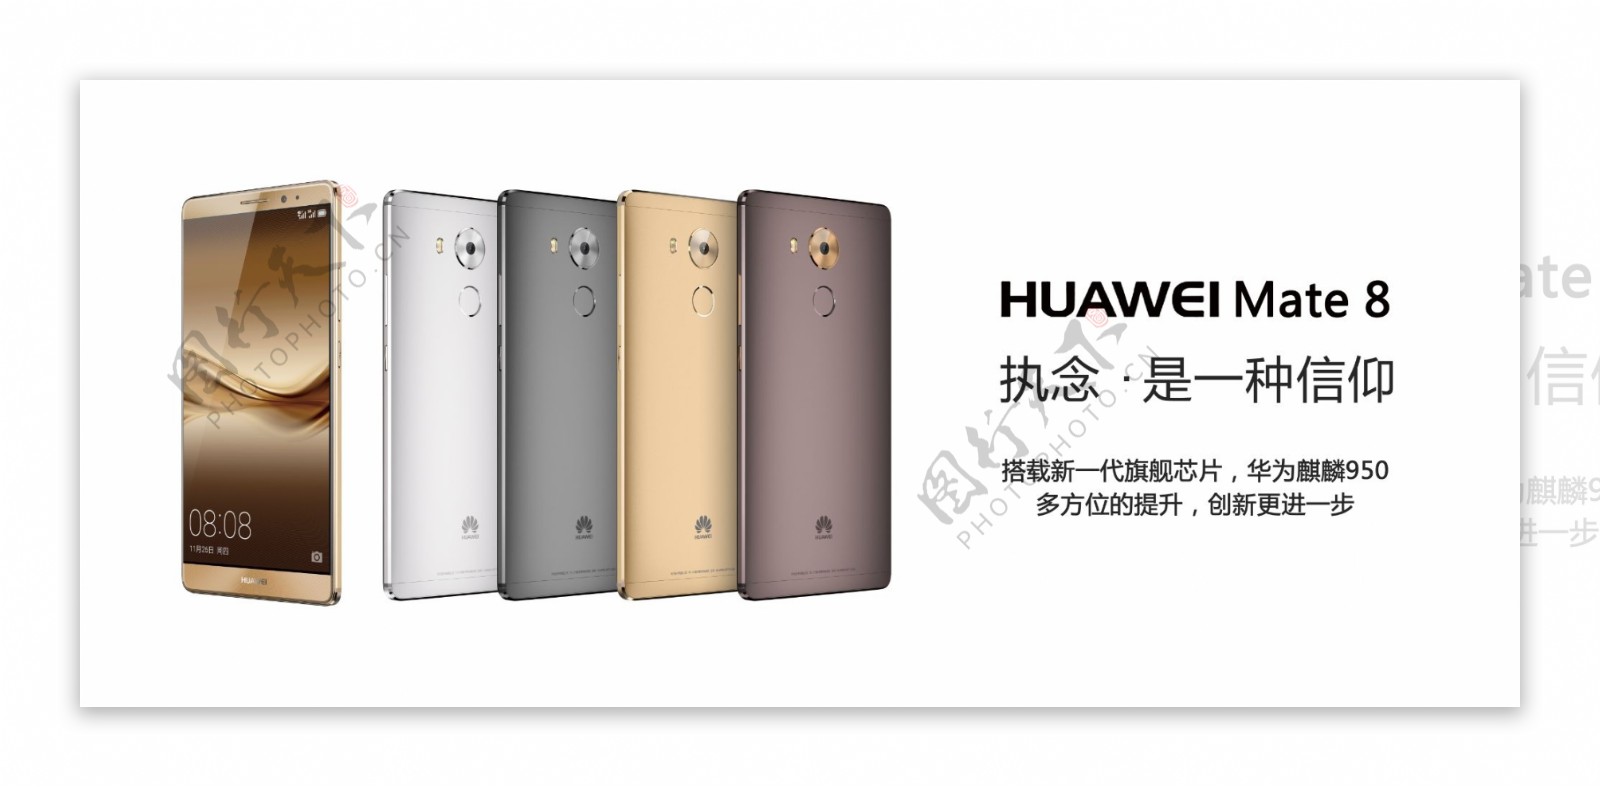 Huawei Mate 8 launches this December 9th in China - NotebookCheck.net News